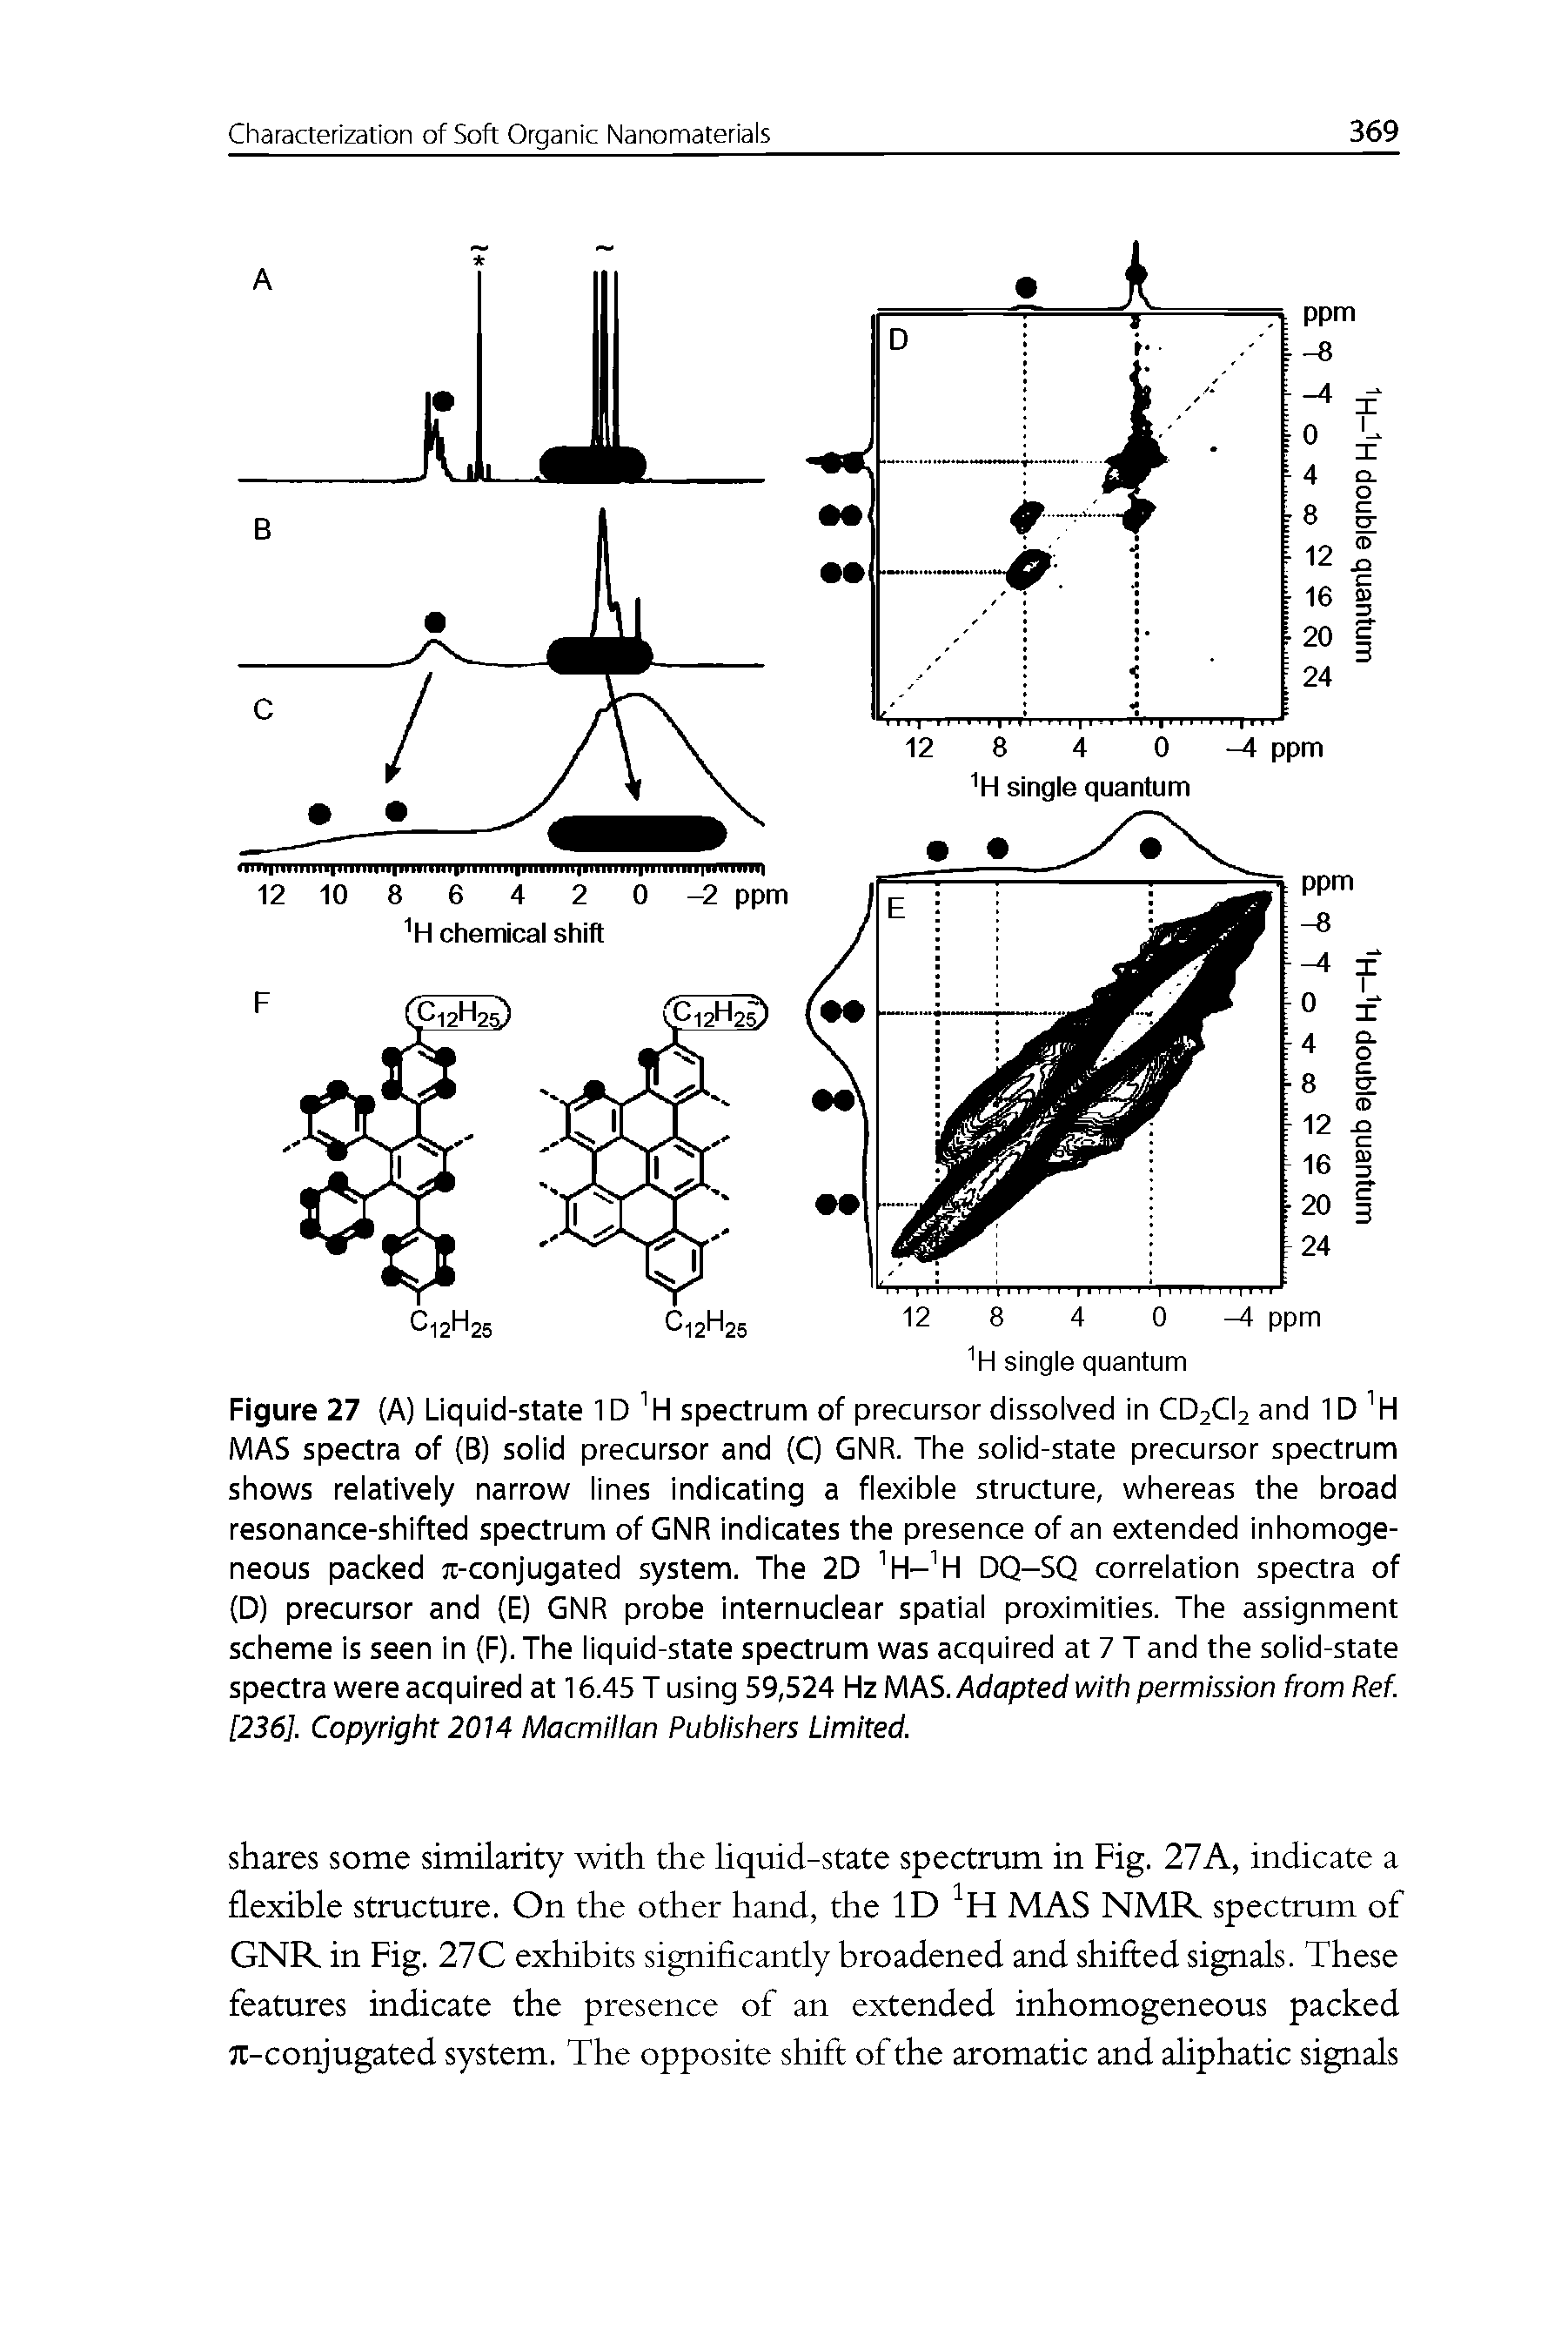 Figure 27 (A) Liquid-state ID spectrum of precursor dissoived in CD2CI2 and ID MAS spectra of (B) solid precursor and (C) GNR. The solid-state precursor spectrum shows relatively narrow lines indicating a flexible structure, whereas the broad resonance-shifted spectrum of GNR indicates the presence of an extended inhomogeneous packed -conjugated system. The 2D H- H DQ-SQ correlation spectra of (D) precursor and (E) GNR probe internuclear spatial proximities. The assignment scheme is seen in (F). The liquid-state spectrum was acquired at 7 T and the solid-state spectra were acquired at 16.45 T using 59,524 Hz MAS. Adapted with permission from Ref. [236]. Copyright 2014 Macmillan Publishers Limited.